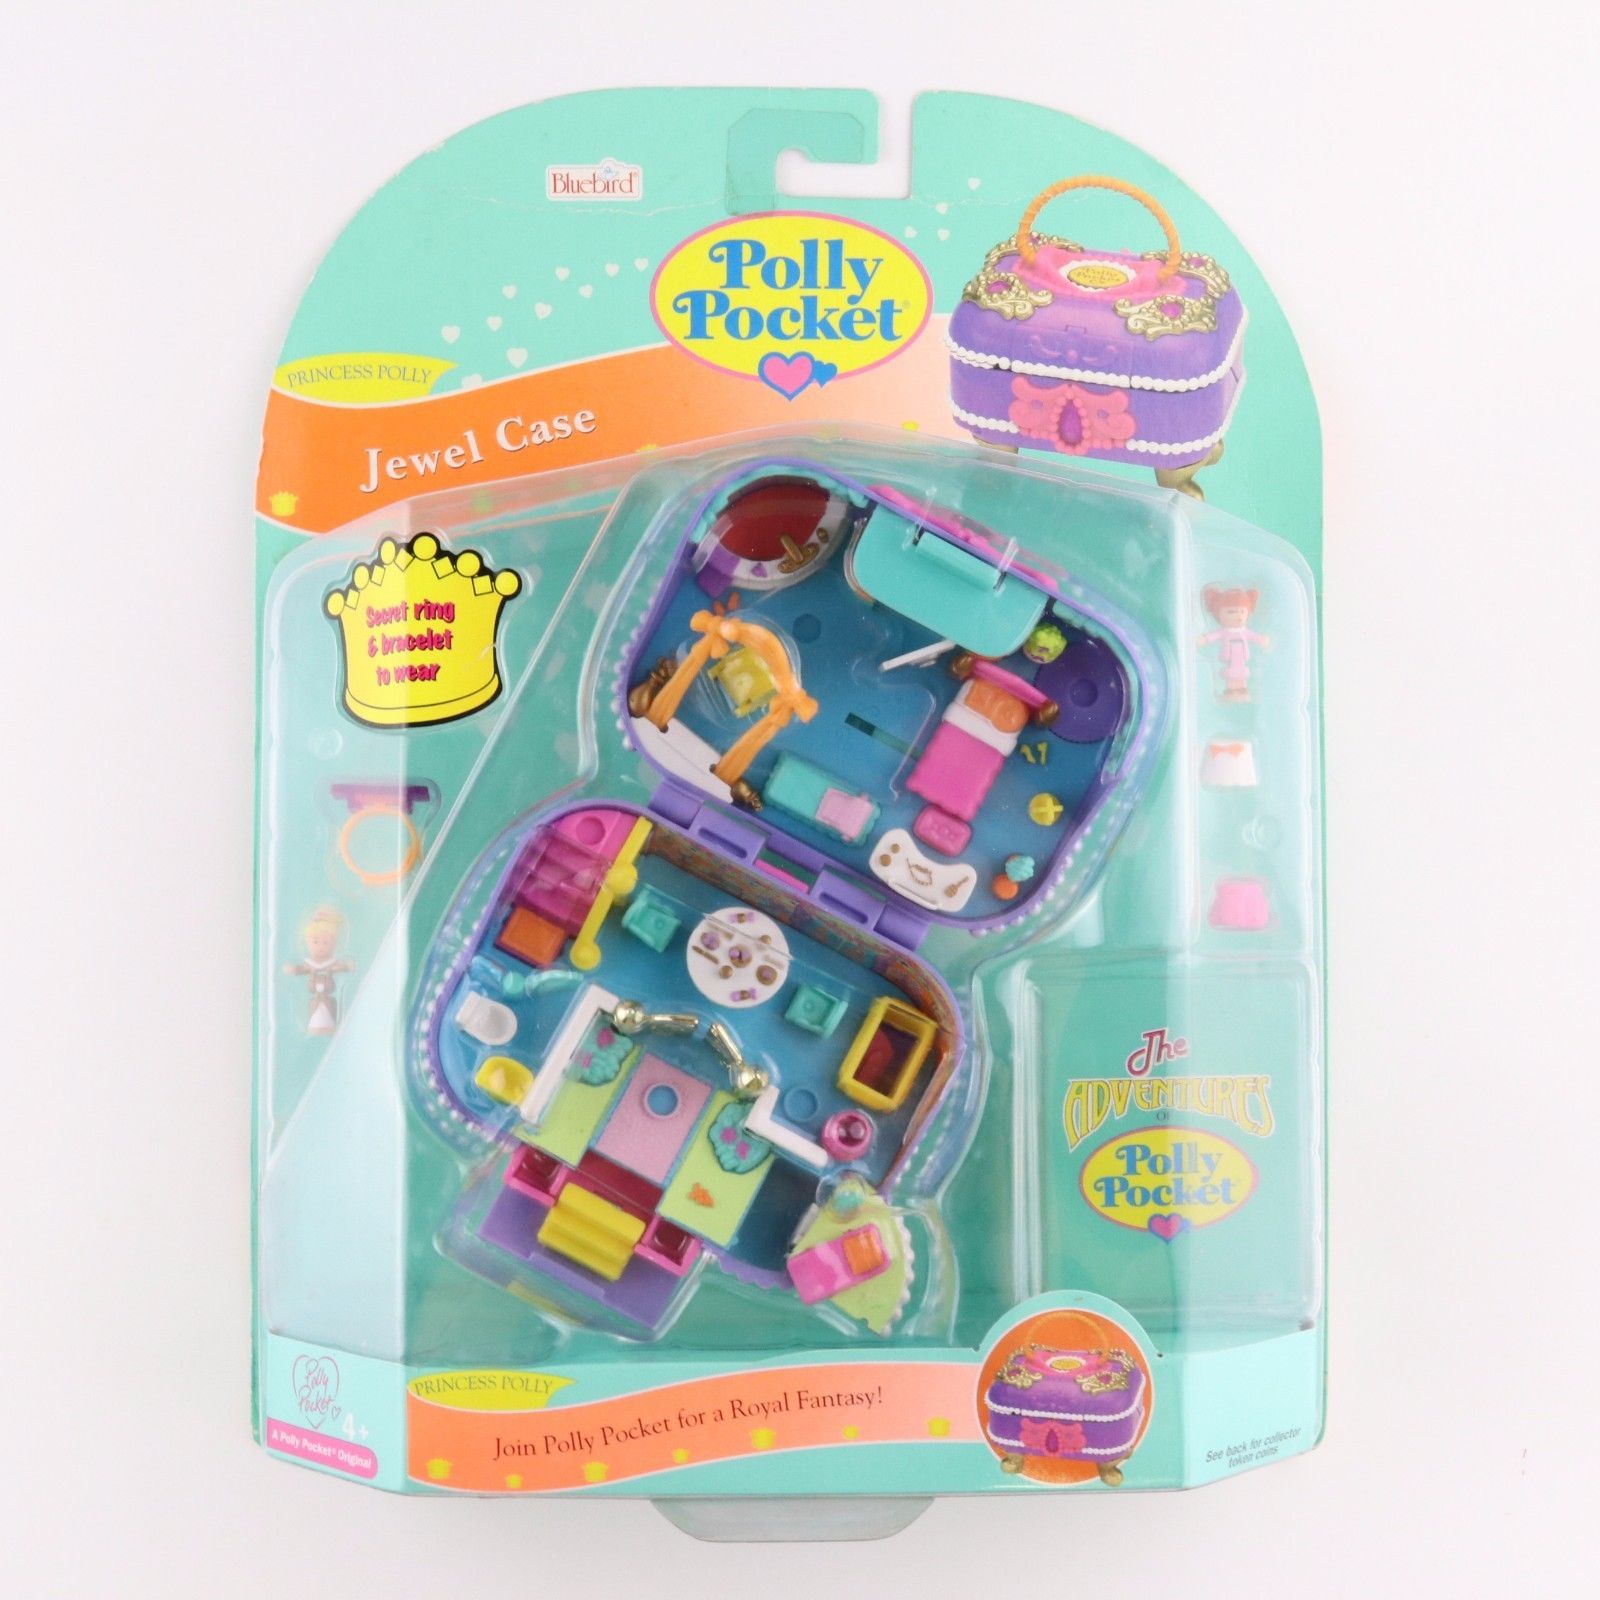 Check The Attic, Your Old Polly Pocket Toys Are Now Worth A Fortune